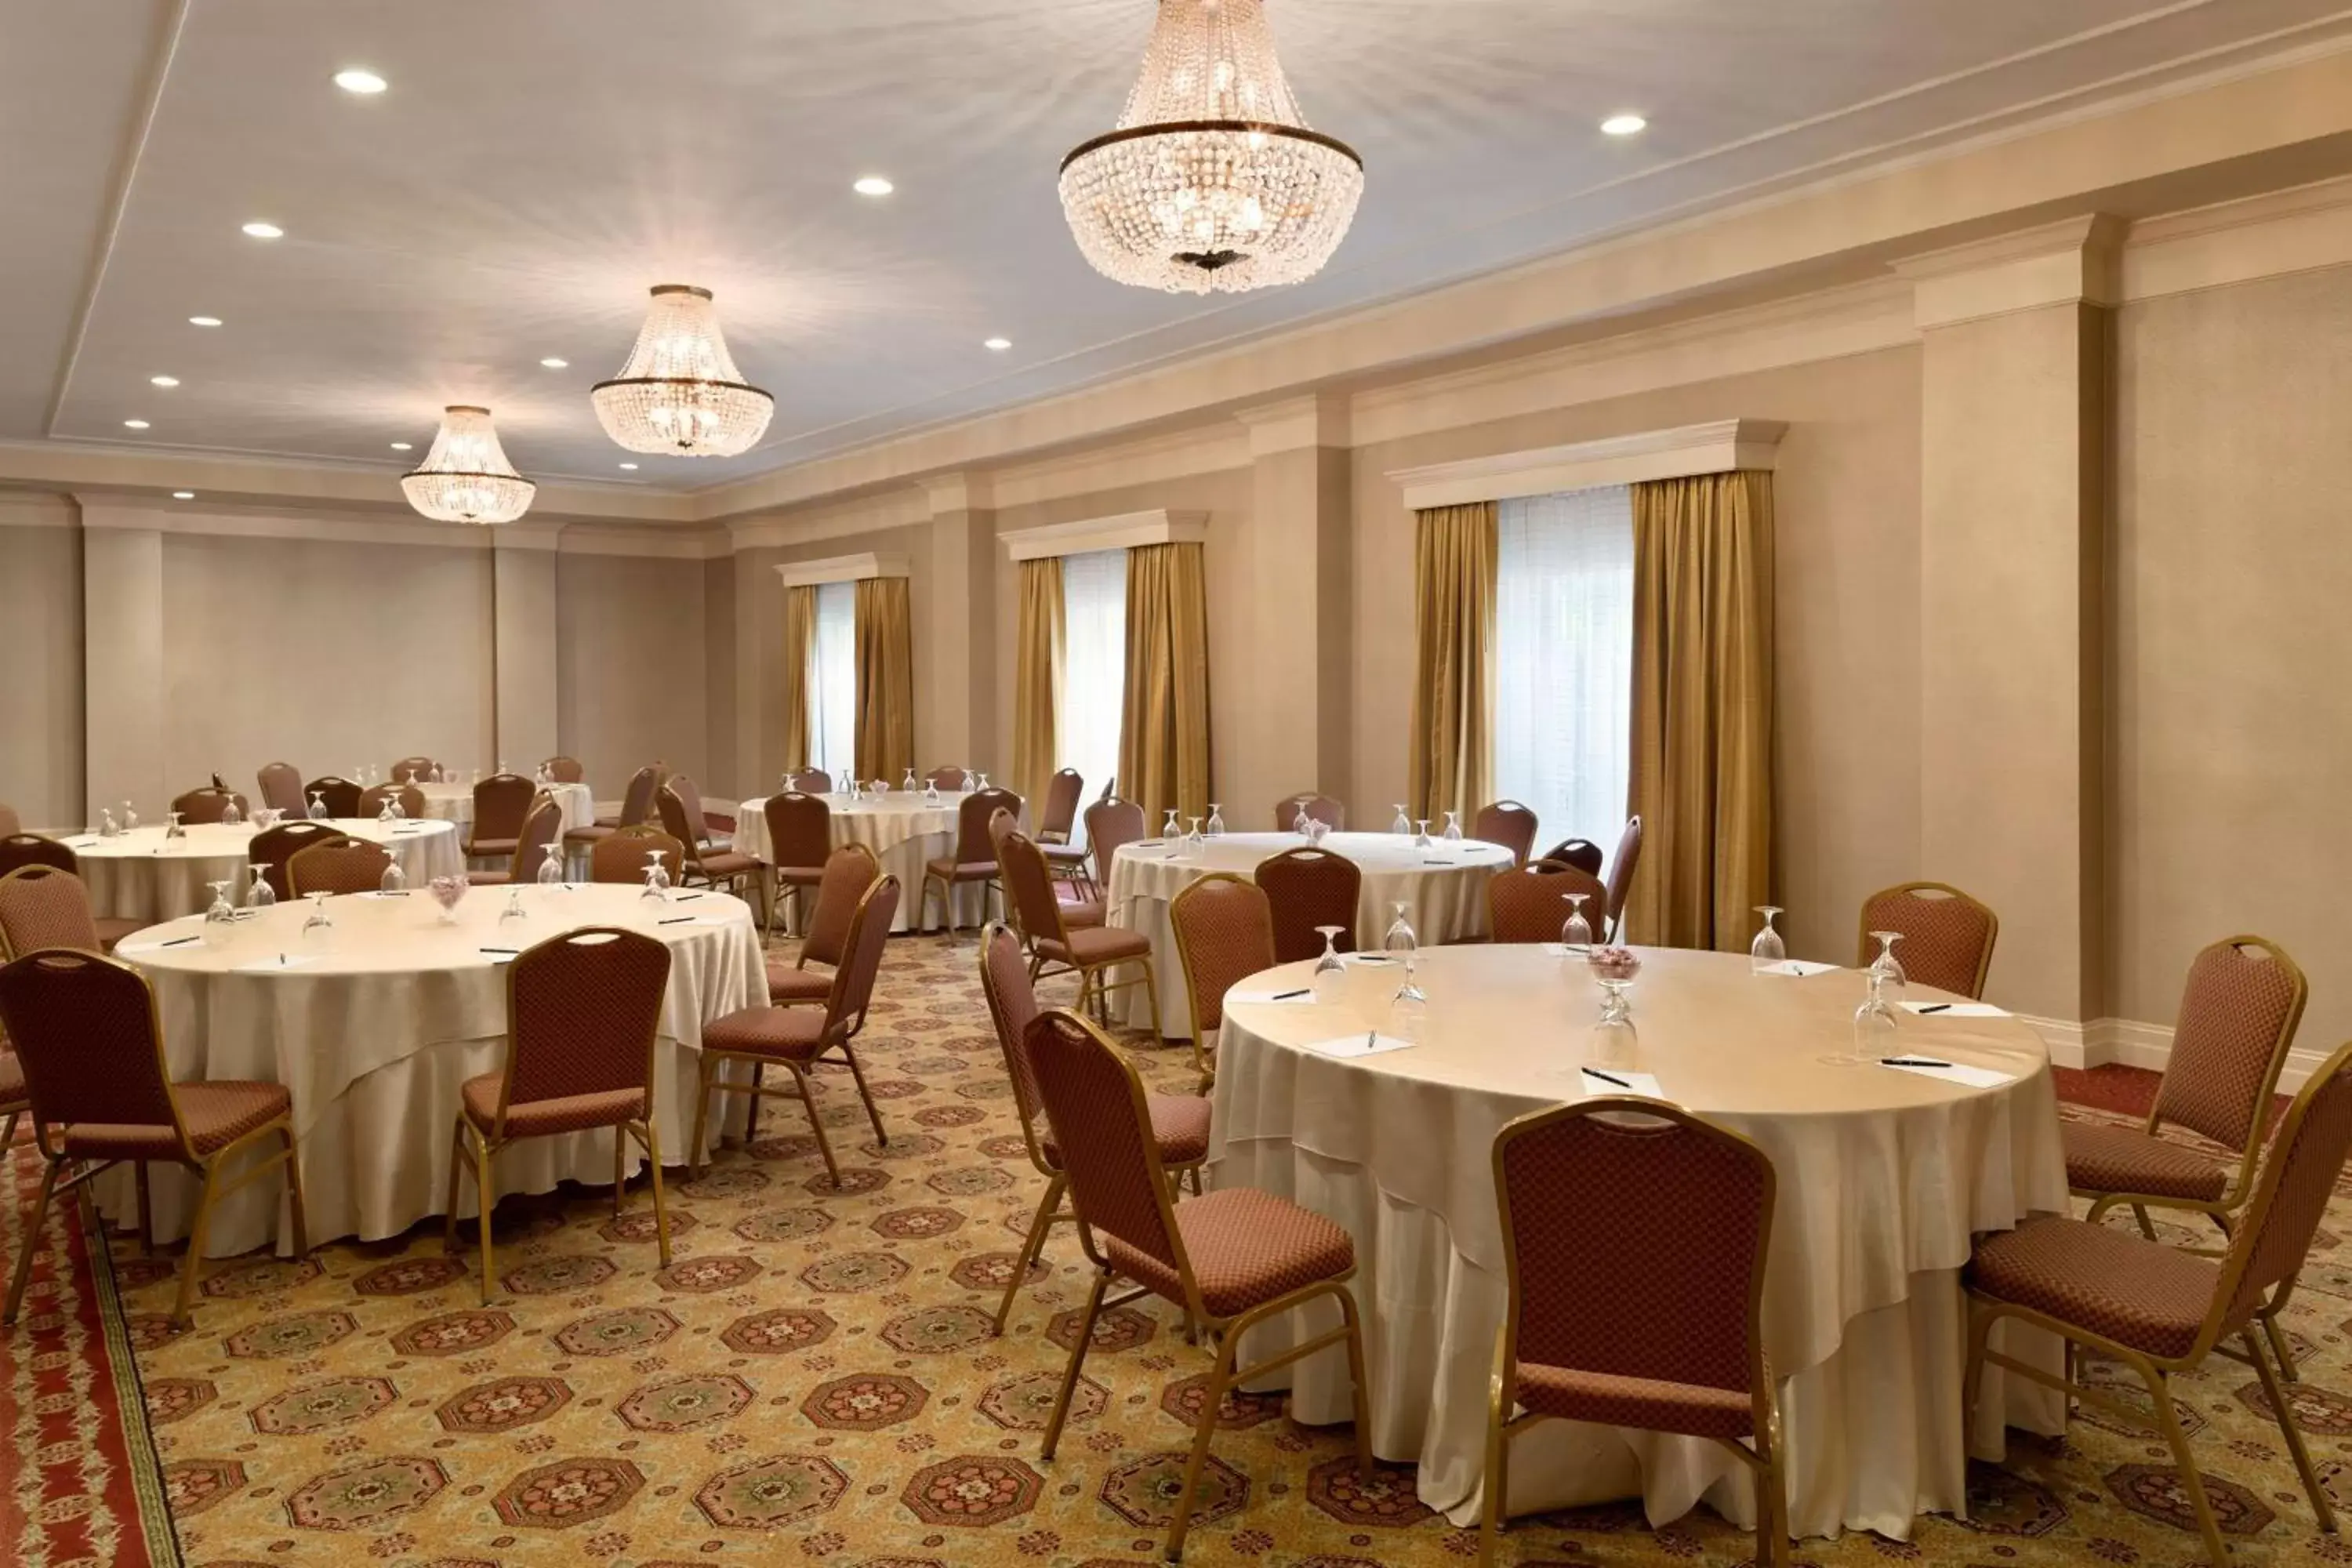 Meeting/conference room, Banquet Facilities in Hilton St. Louis Frontenac